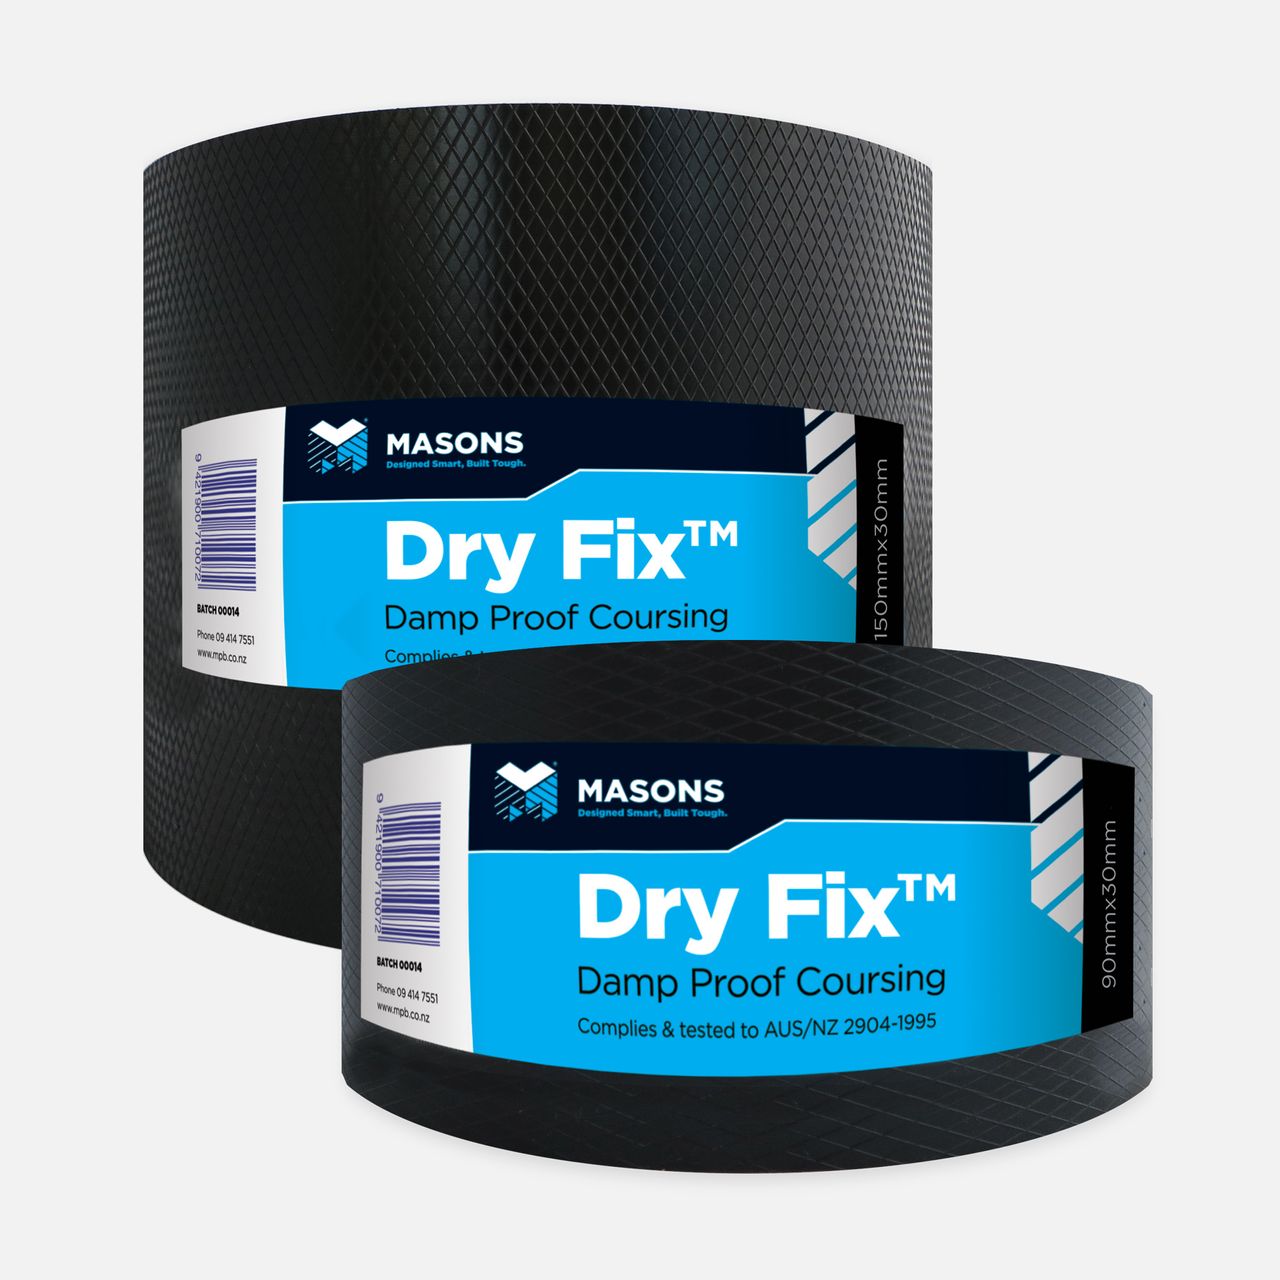 Dry Fix DPC | Concealed Flashing Barrier | Masons New Zealand